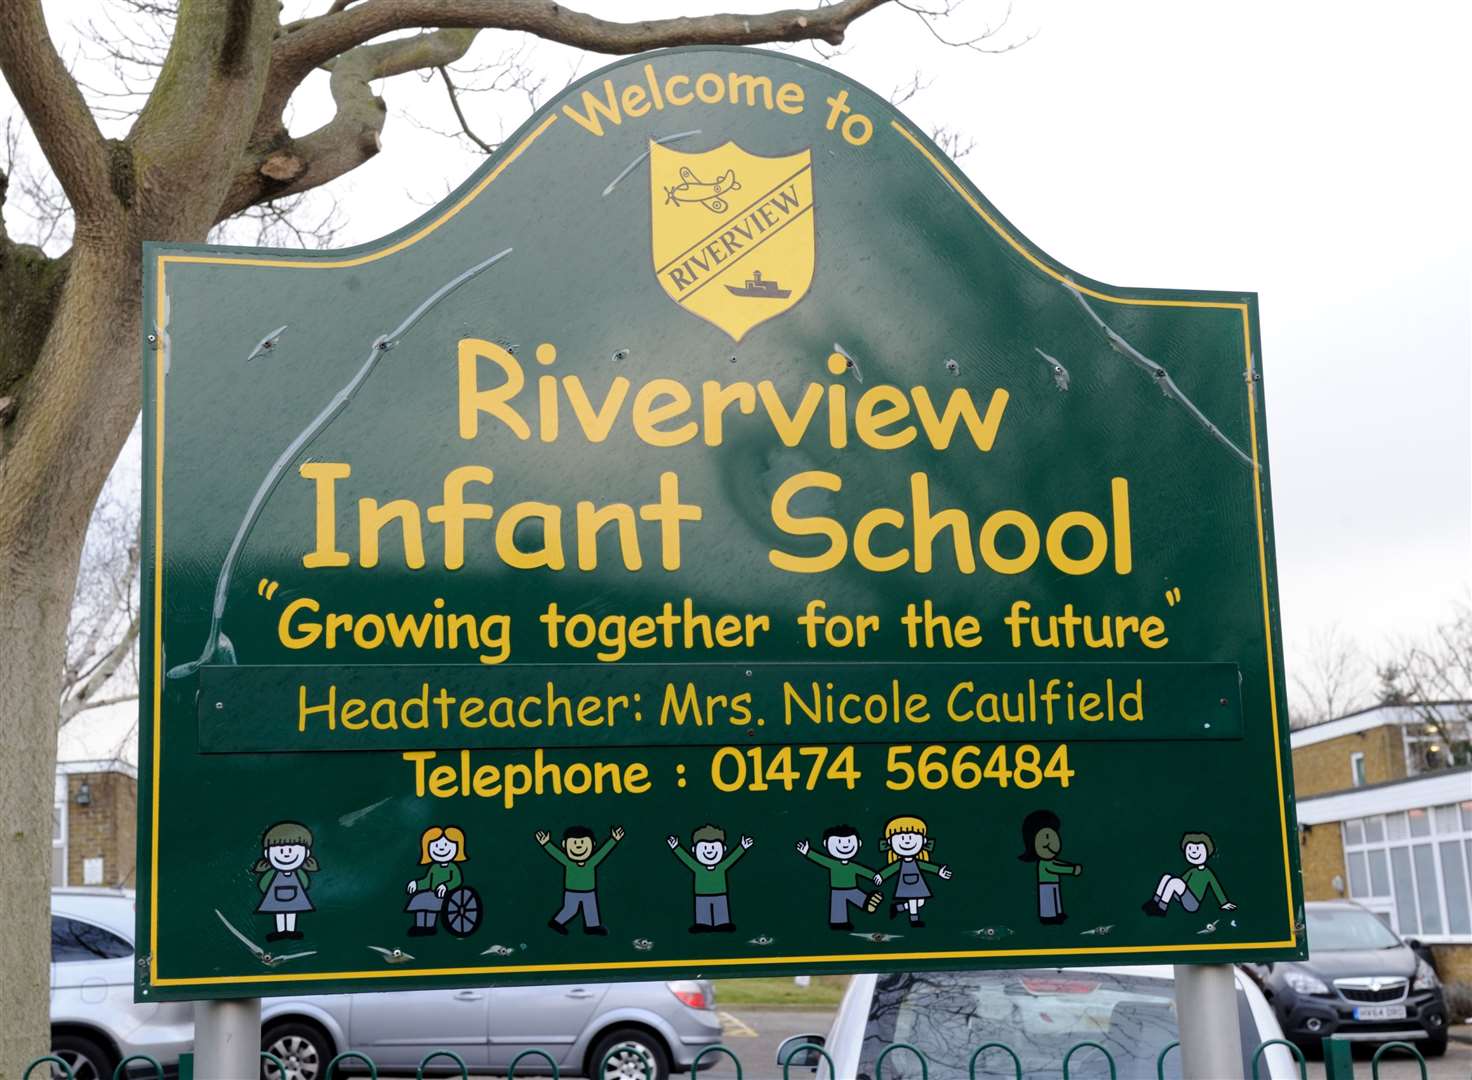 Riverview Infant School in Cimba Wood, Gravesend. Picture: Simon Hildrew.